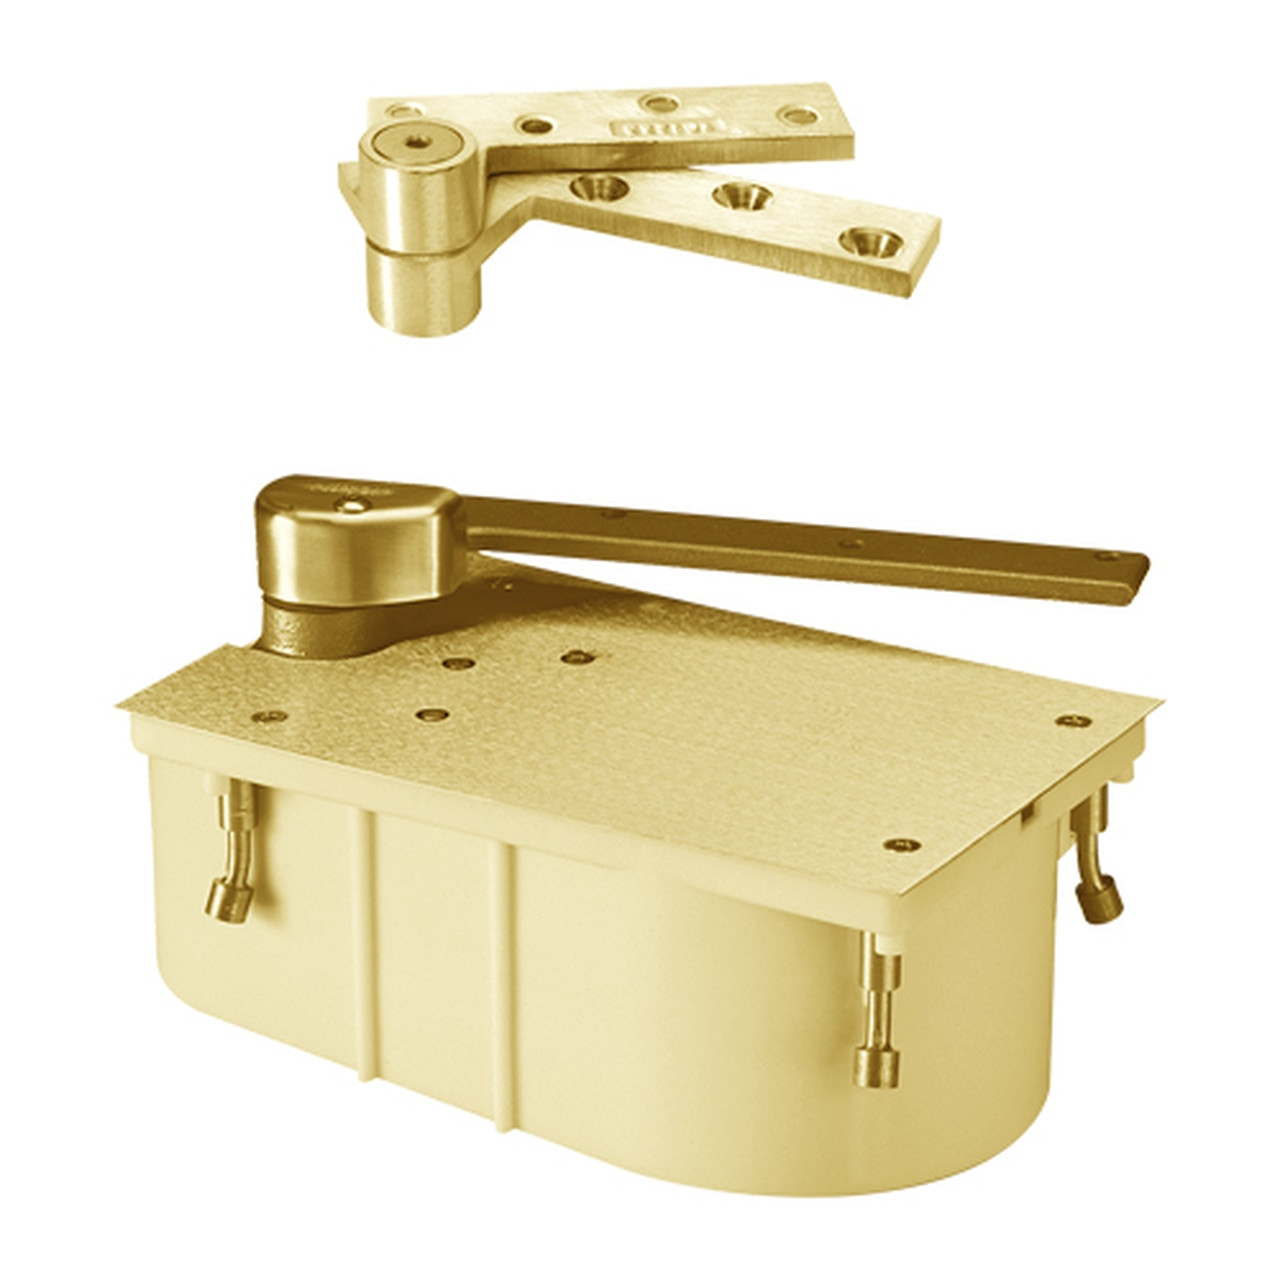 27-105N-LCC-LH-605 Rixson 27 Series Heavy Duty 3/4" Offset Hung Floor Closer in Bright Brass Finish